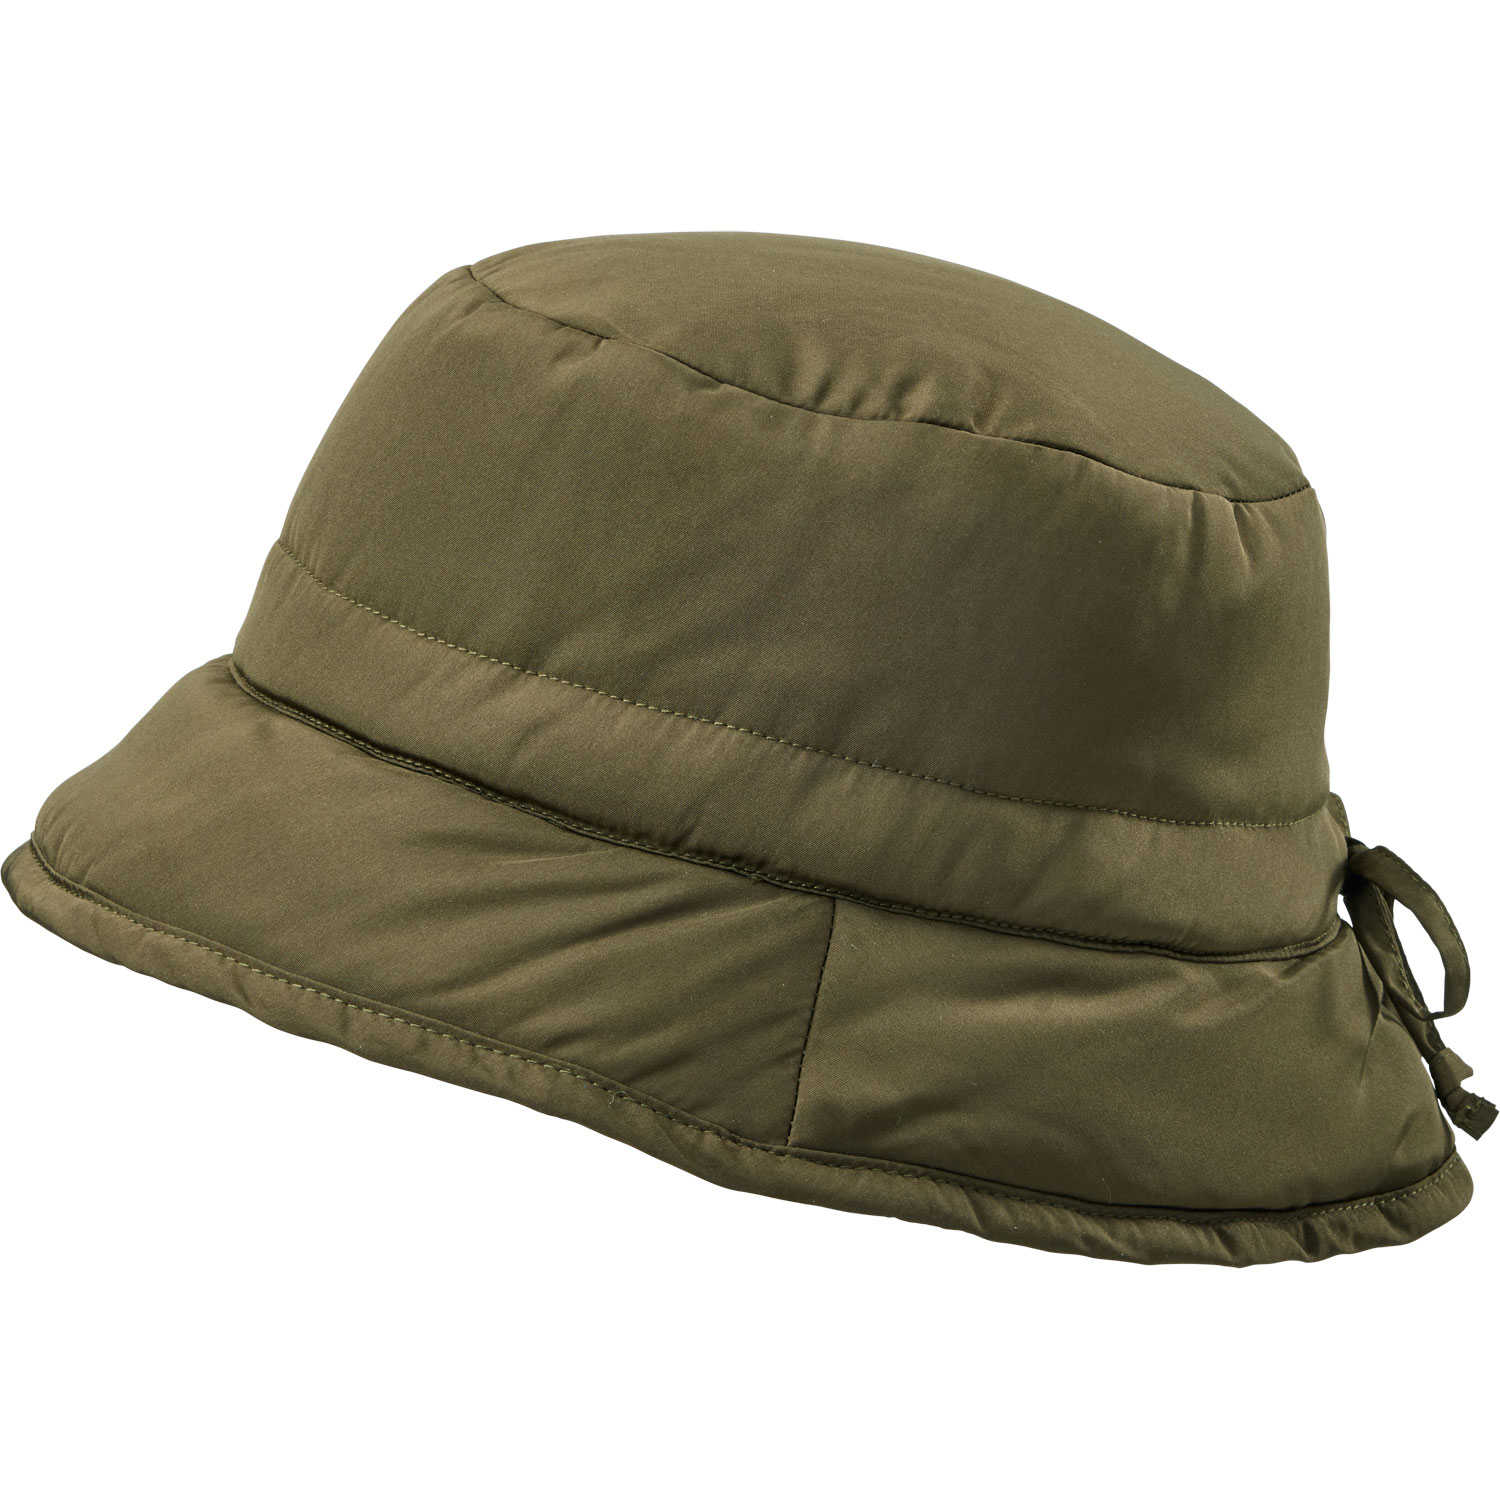 Women's Insulated Adjustable Bucket Hat - Green L/XL Duluth Trading Company